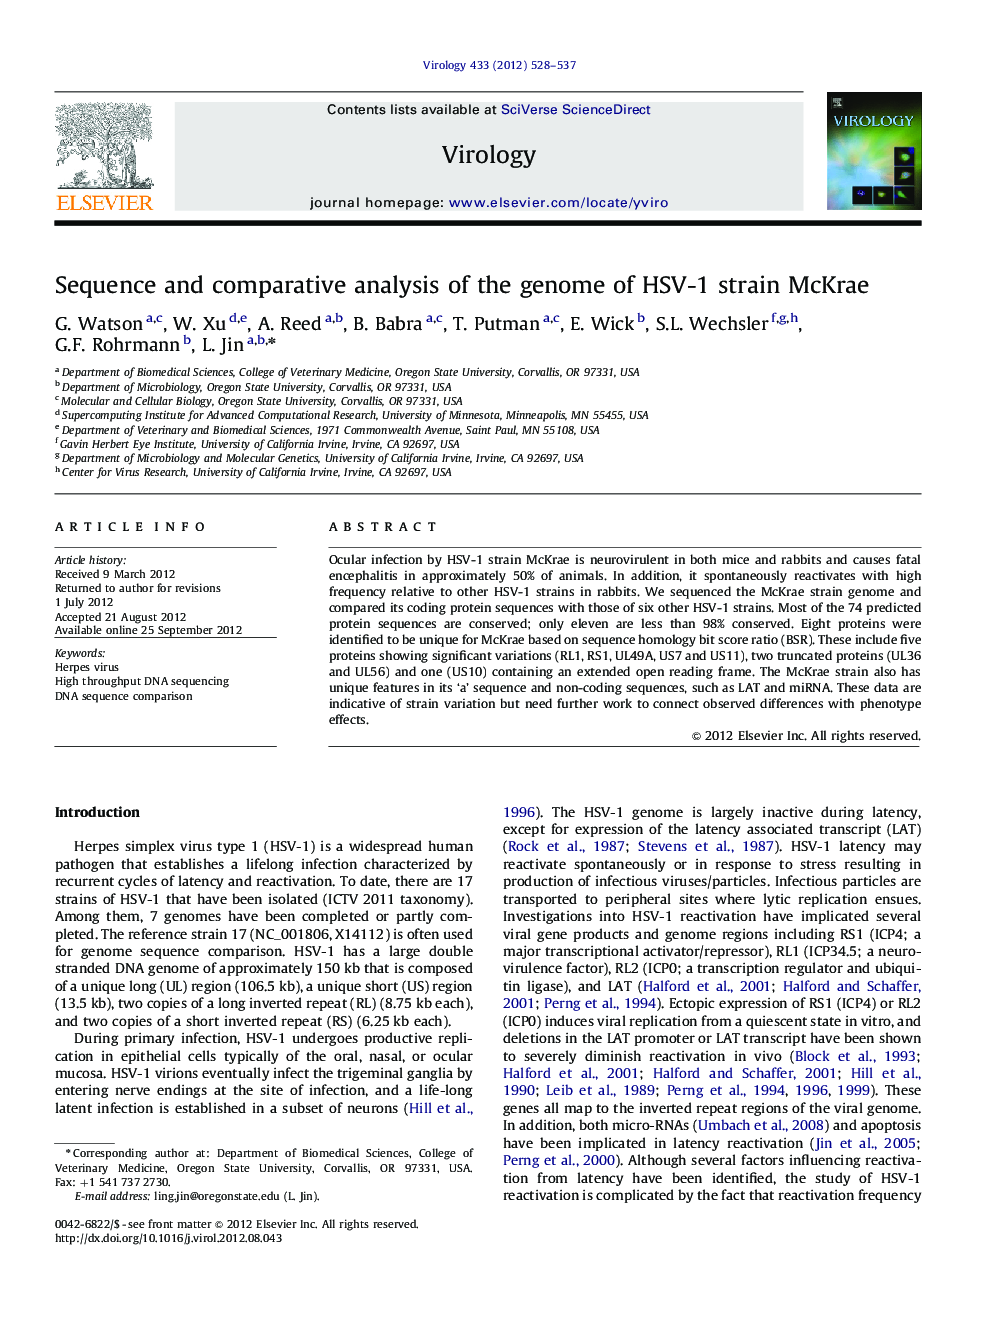 Sequence and comparative analysis of the genome of HSV-1 strain McKrae